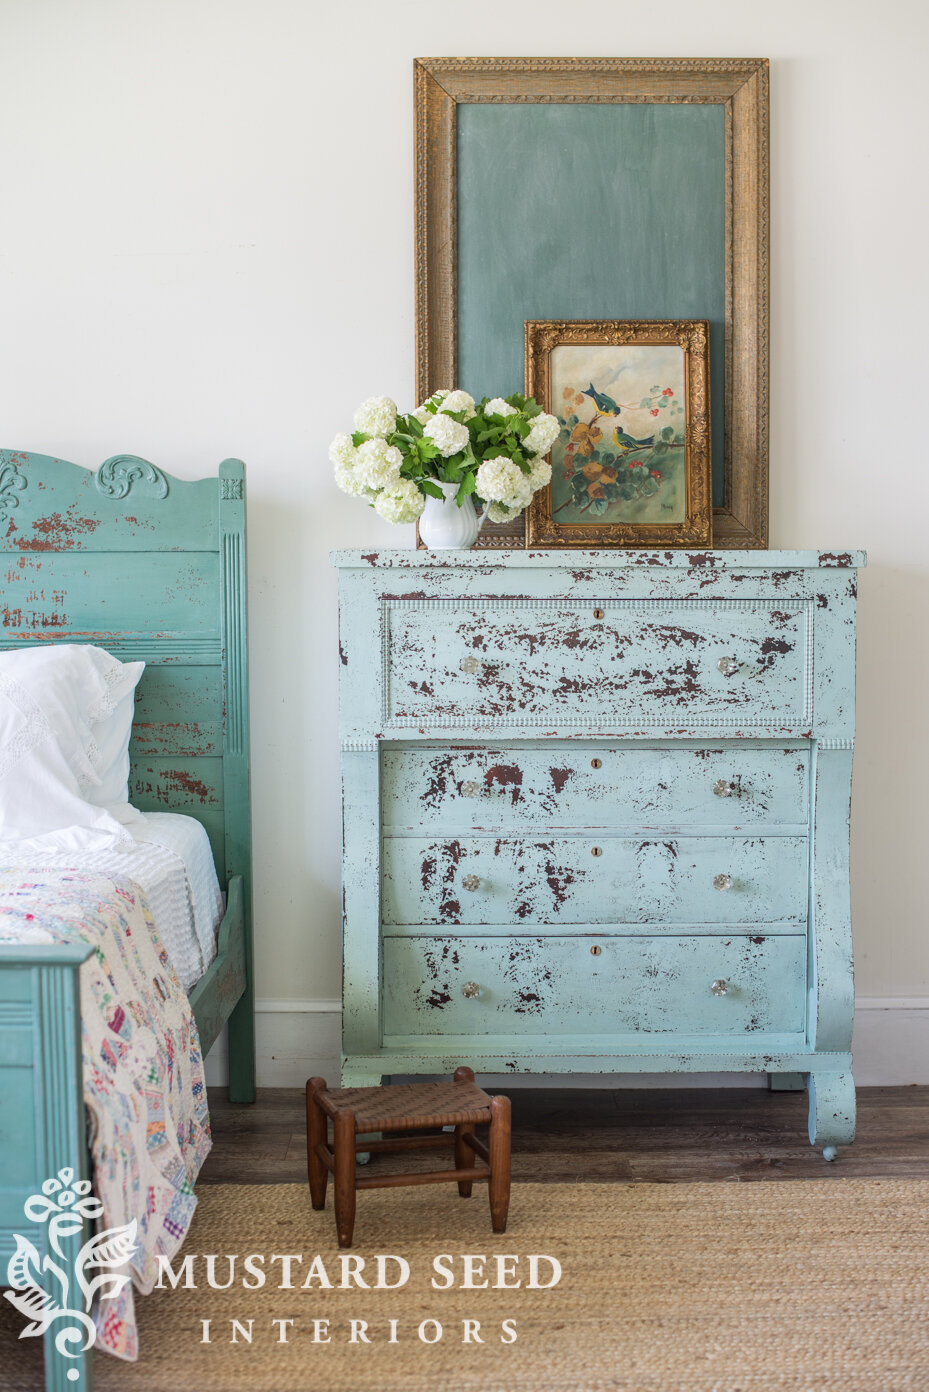 Get The Look Of Naturally Chipped Paint With Milk Paint - Petticoat Junktion